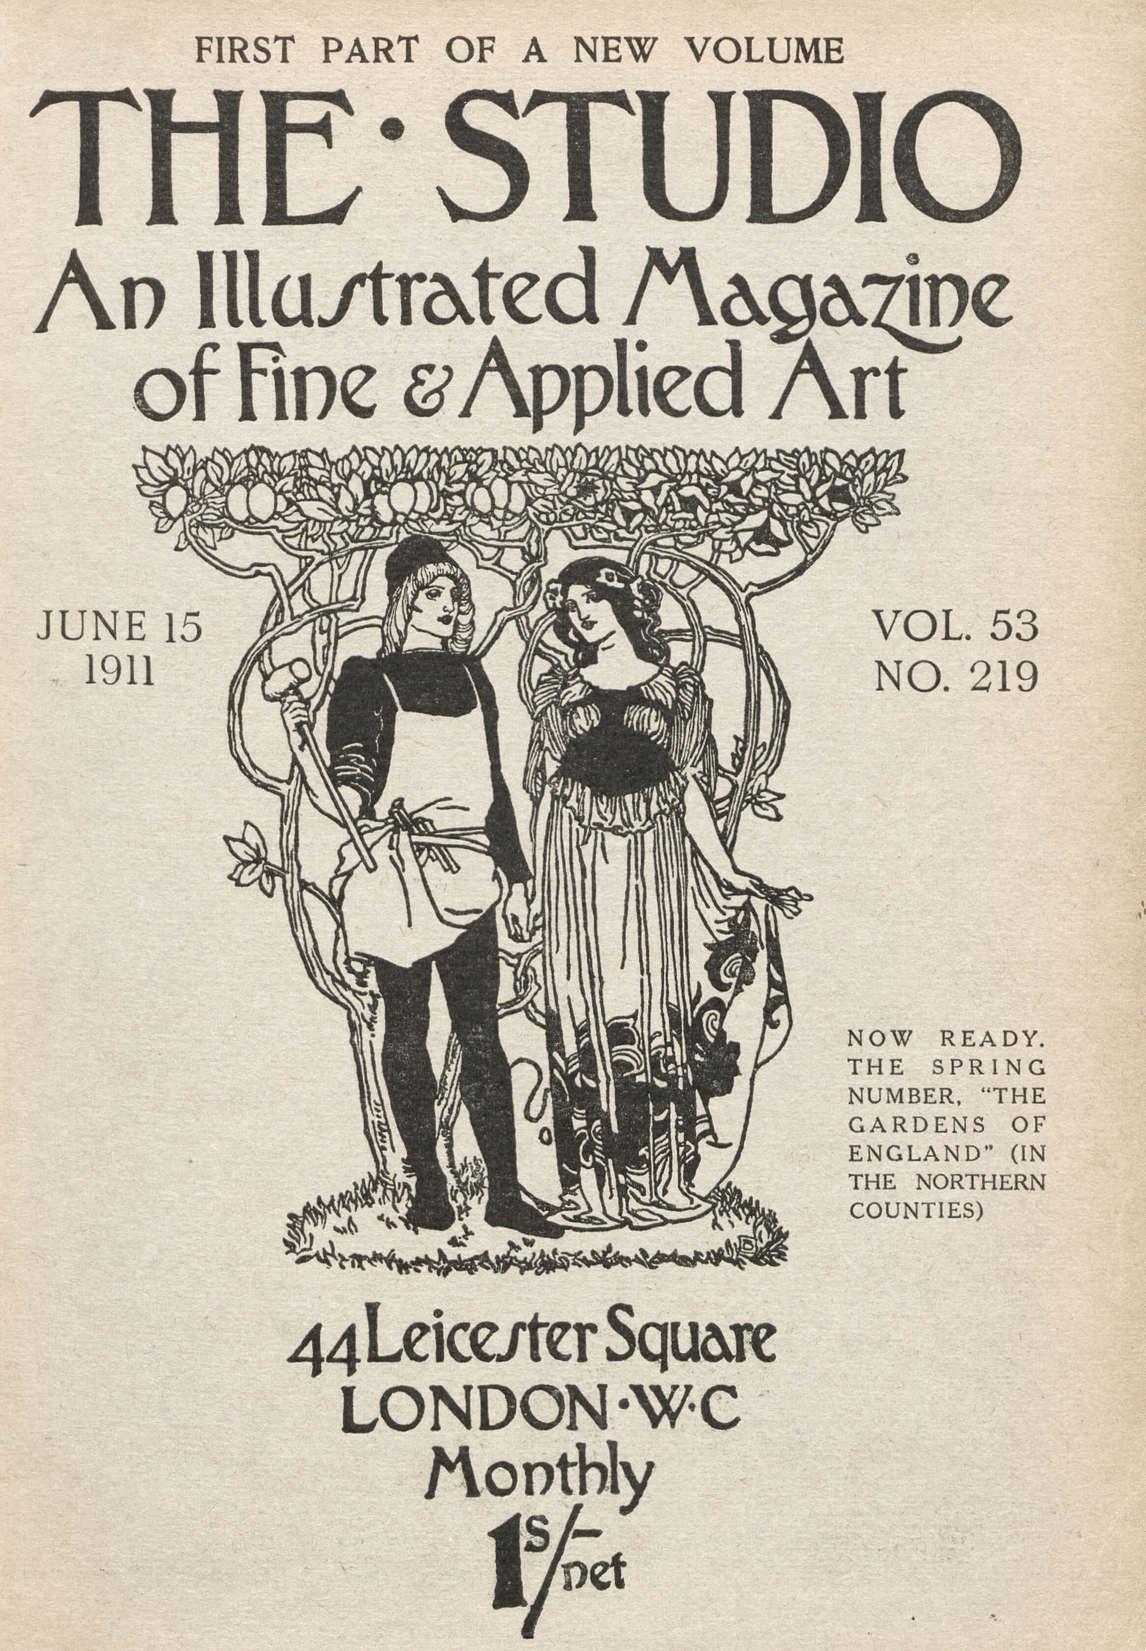 Art Canada Institute, photograph of the cover of The Studio 53, no. 219 (June 15, 1911)